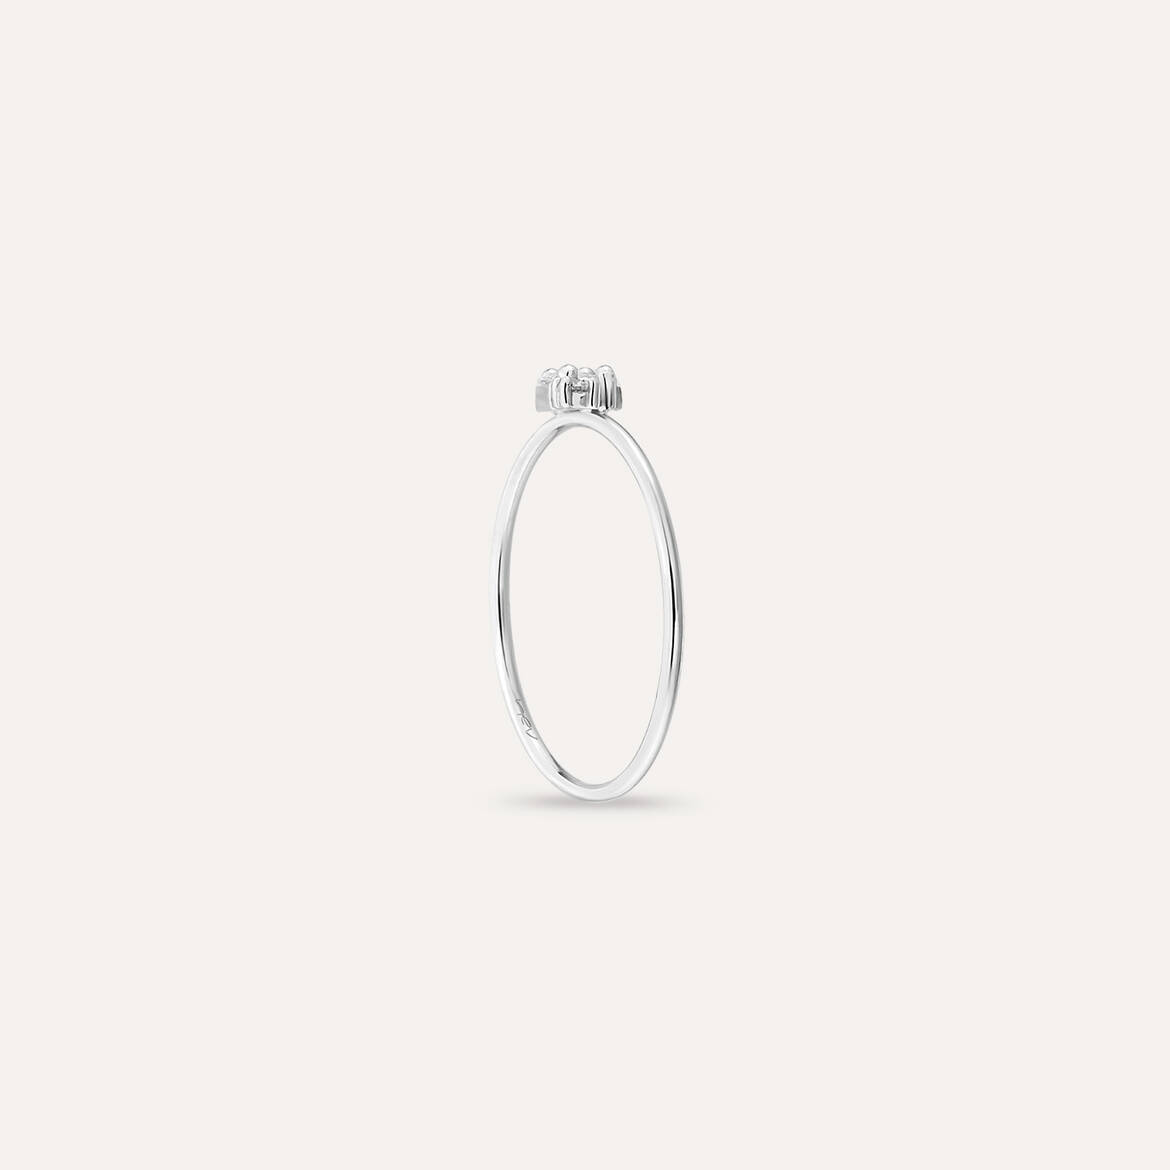 Seed 0.16 CT Baguette Cut Diamond White Gold Ring